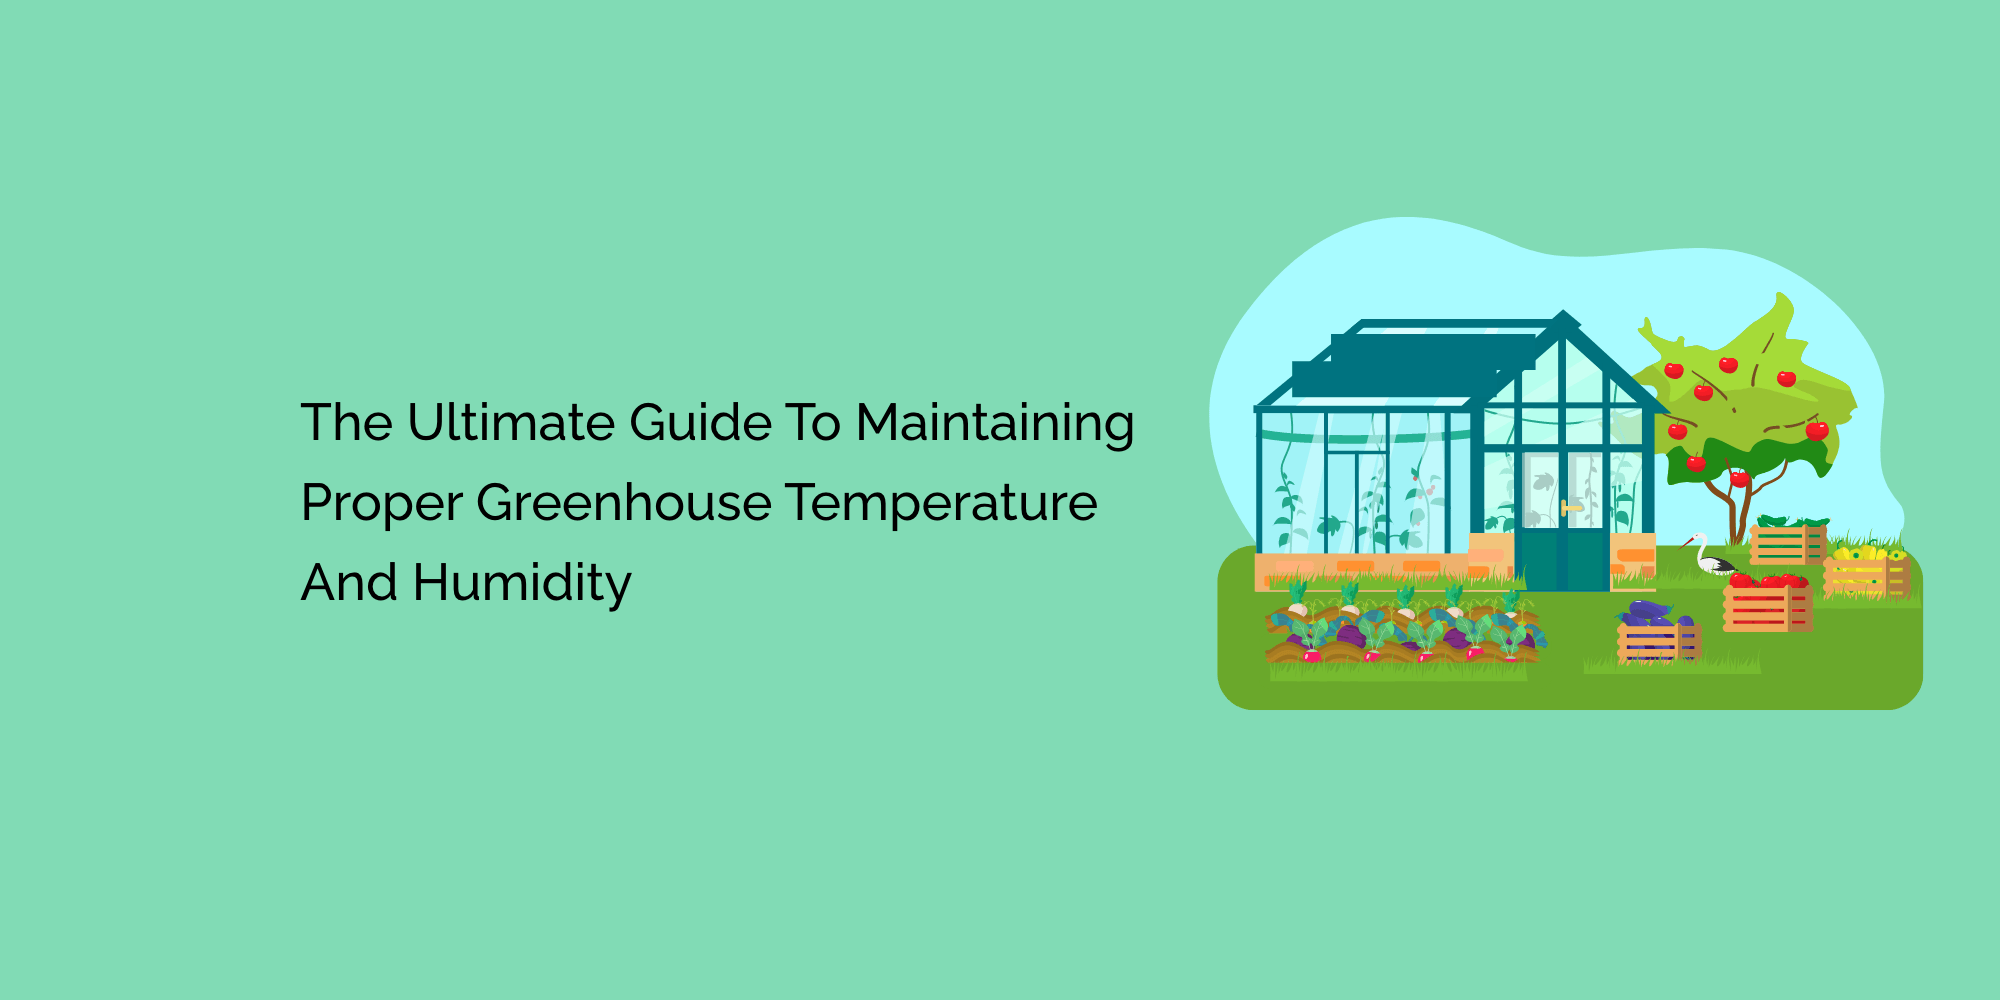 The Ultimate Guide to Maintaining Proper Greenhouse Temperature & Humidity